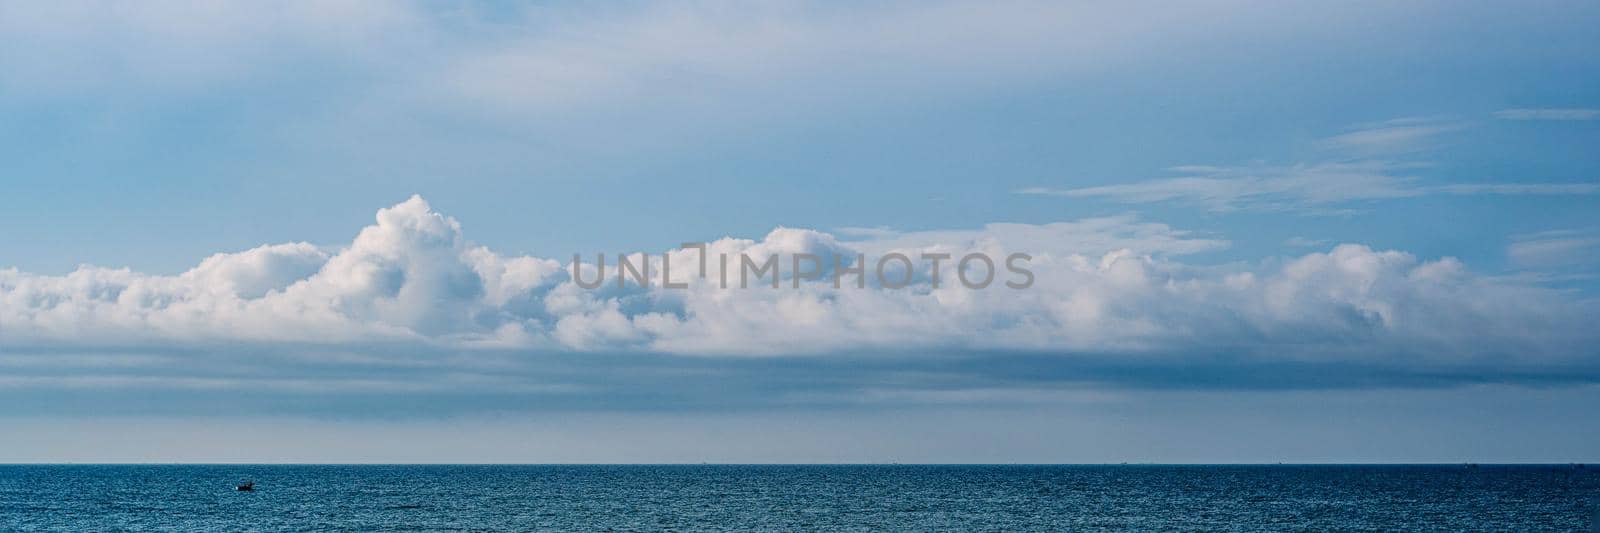 BANNER, LONG FORMAT, crop it. Atmosphere panorama white cloud clear blue sky horizon line calm empty sea. Concept paradise life. Design relax wallpaper background. More tone format collection in stock by nandrey85